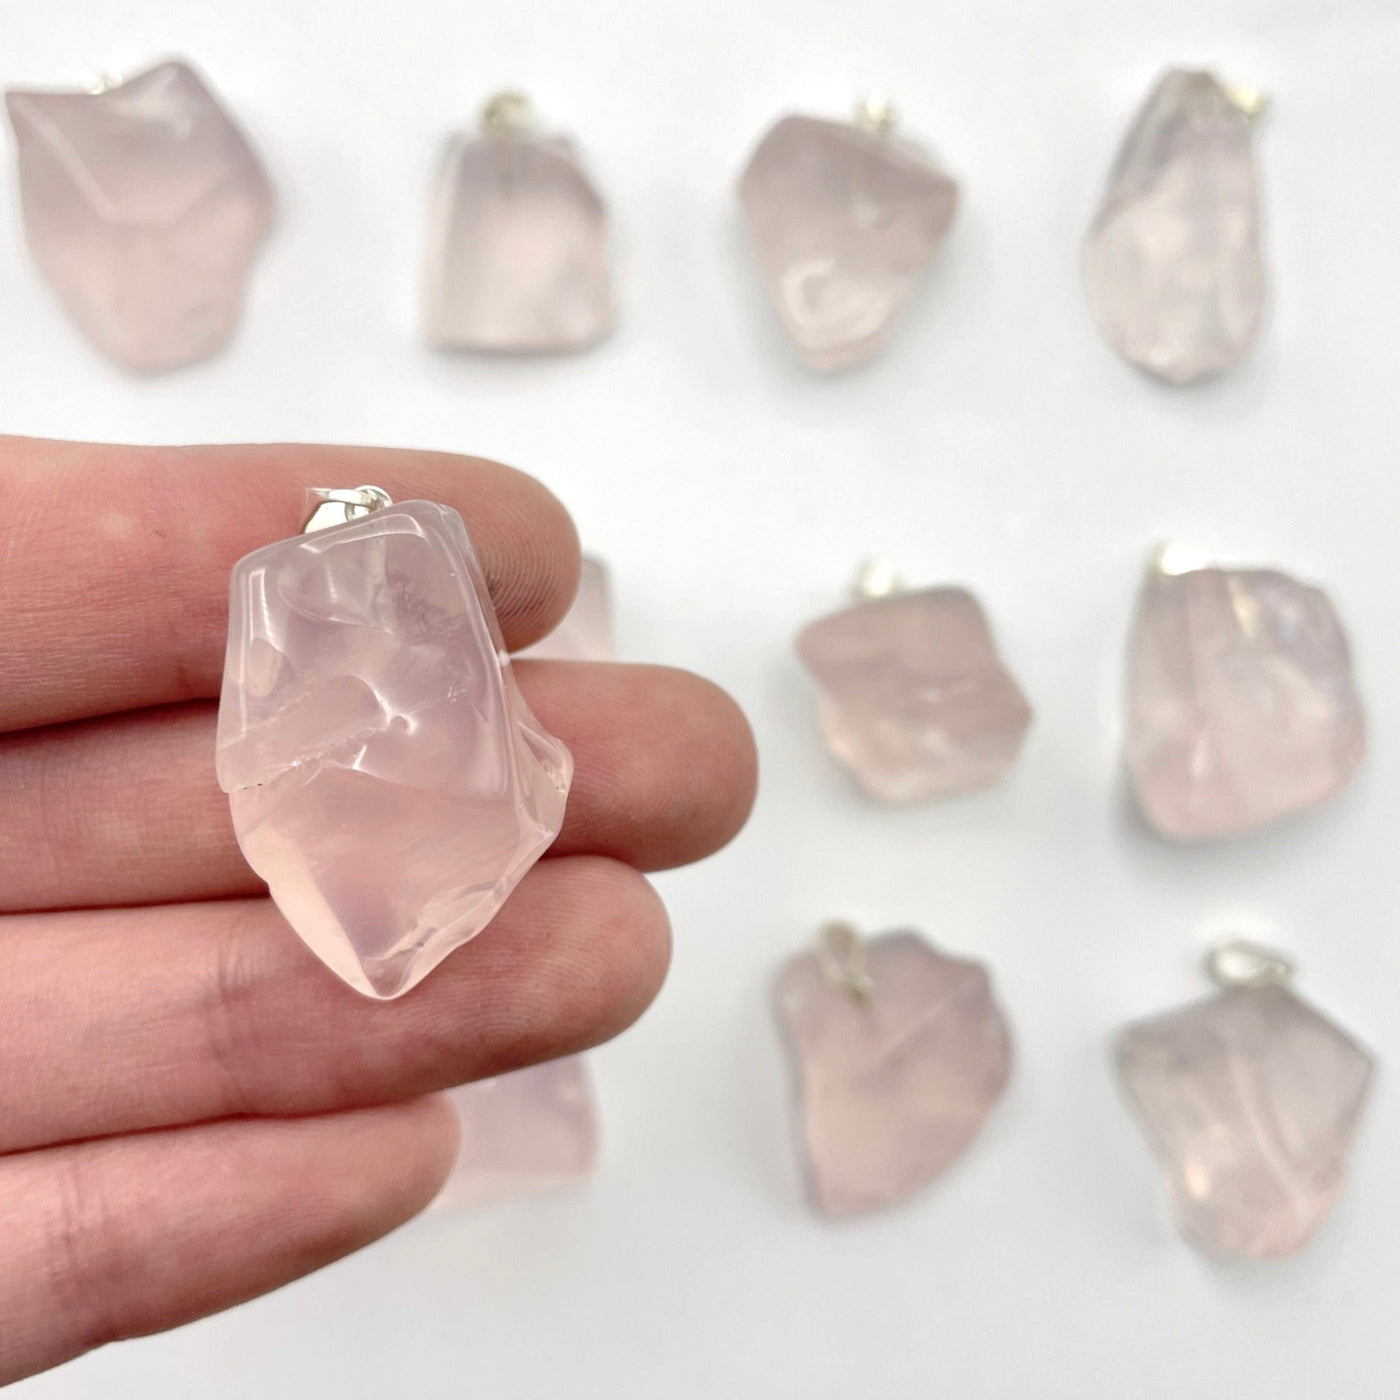 close up of one tumbled rose quartz pendant with silver bail in hand for size reference with many others in the background